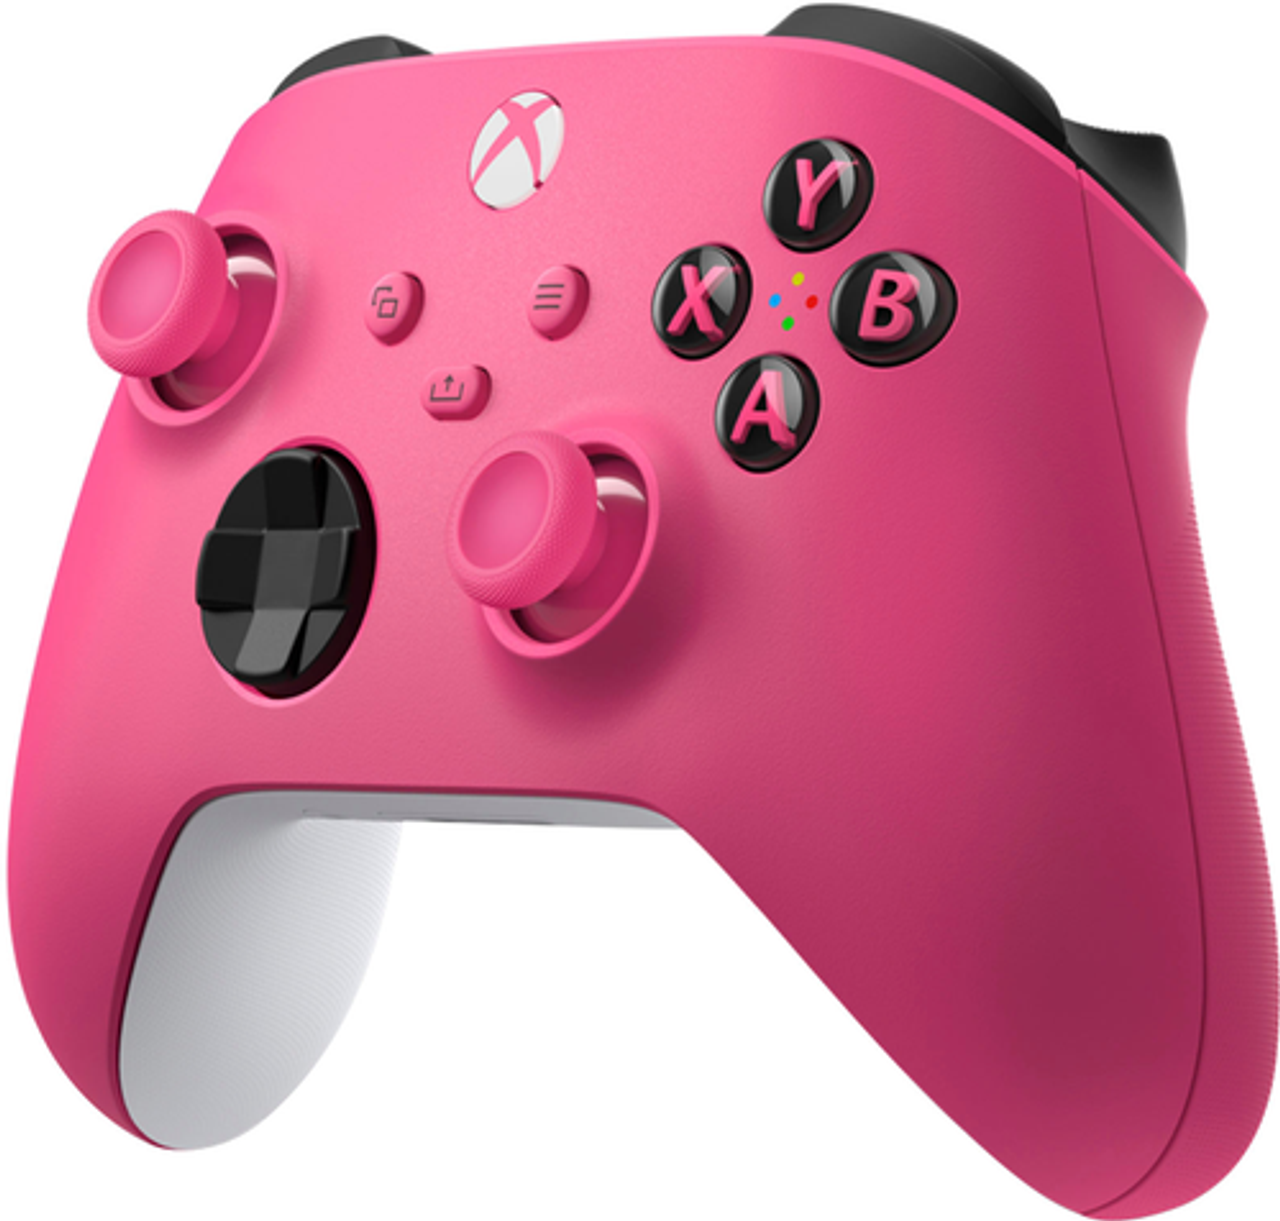 Microsoft - Controller for Xbox Series X, Xbox Series S, and Xbox One (Latest Model) - Deep Pink